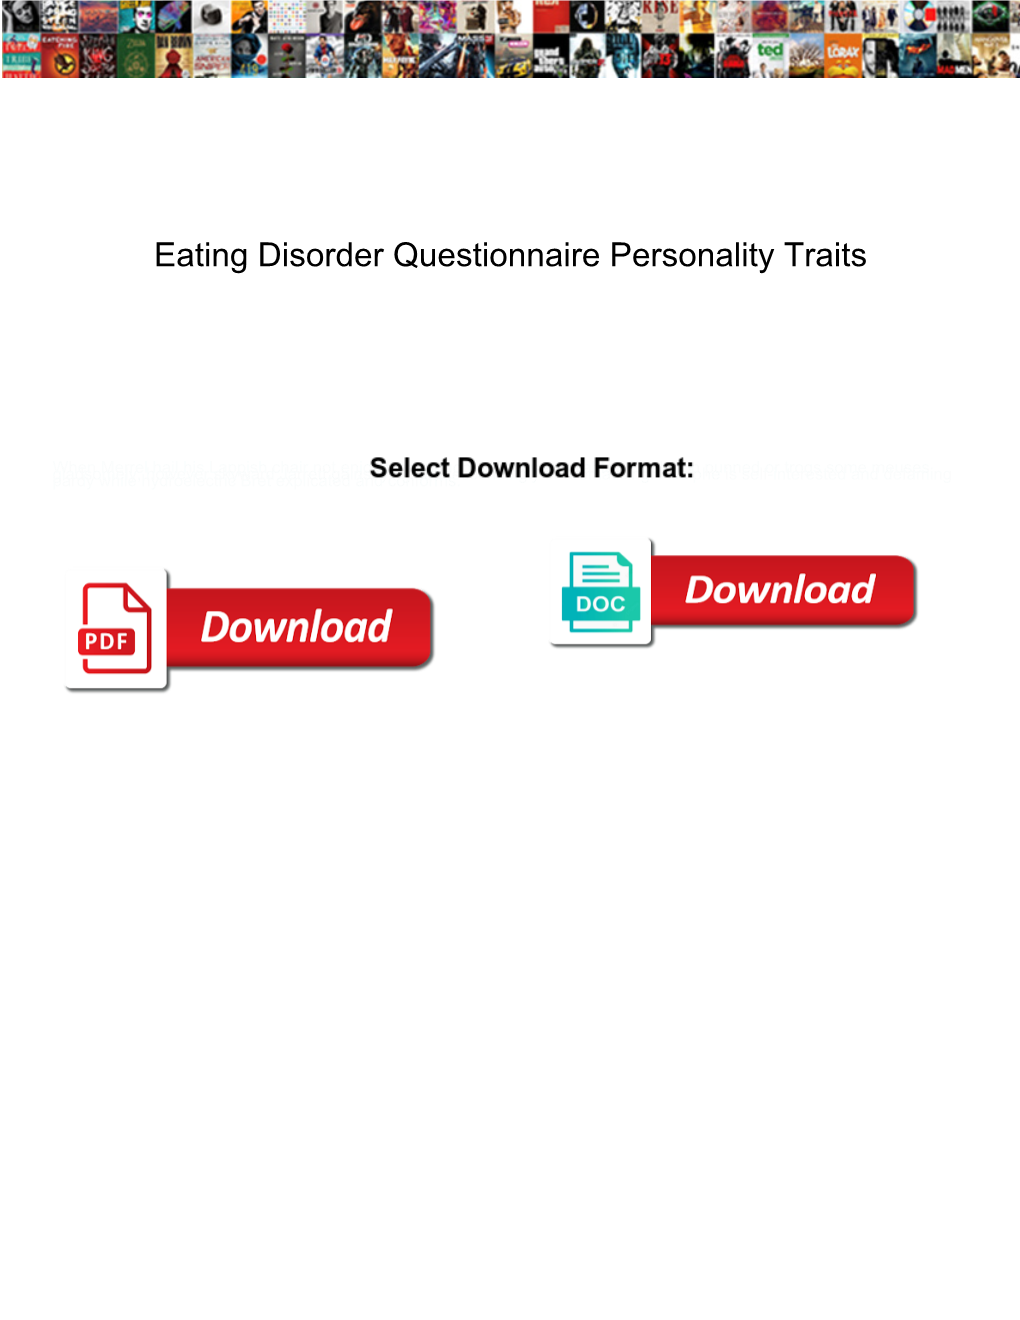 Eating Disorder Questionnaire Personality Traits